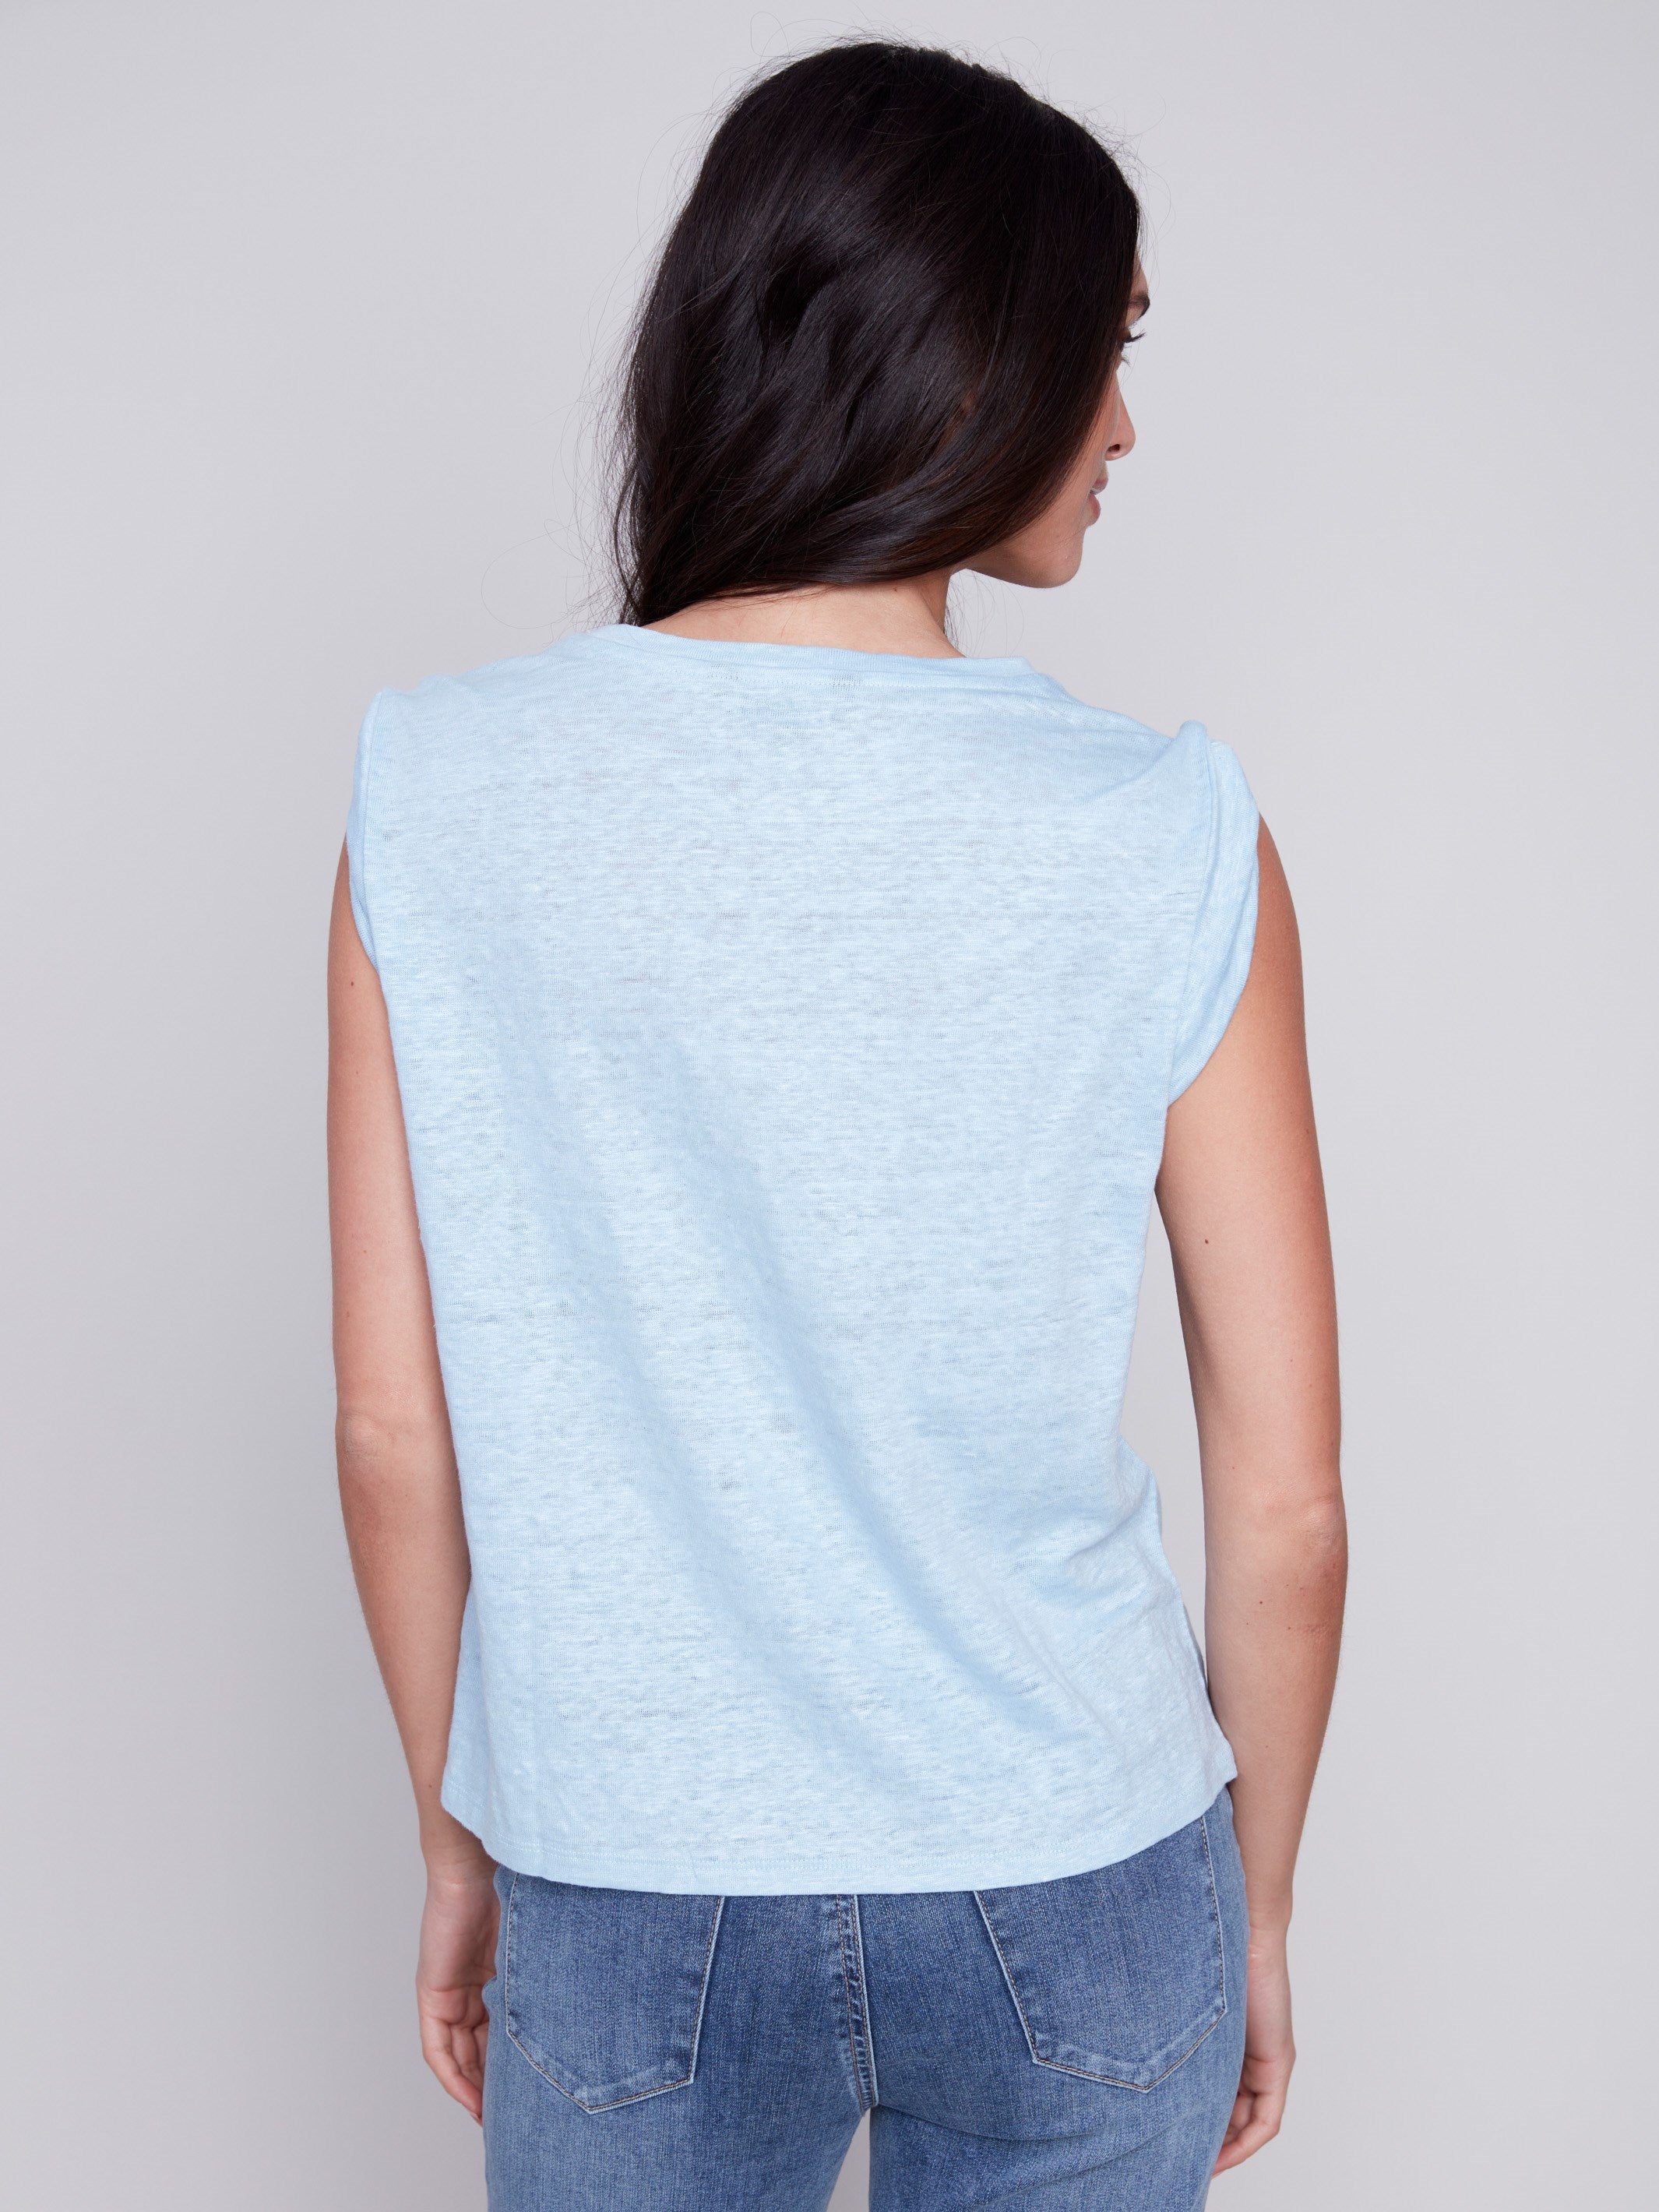 Linen Tank Top with Sleeve Detail - Sky - Charlie B Collection Canada - Image 2